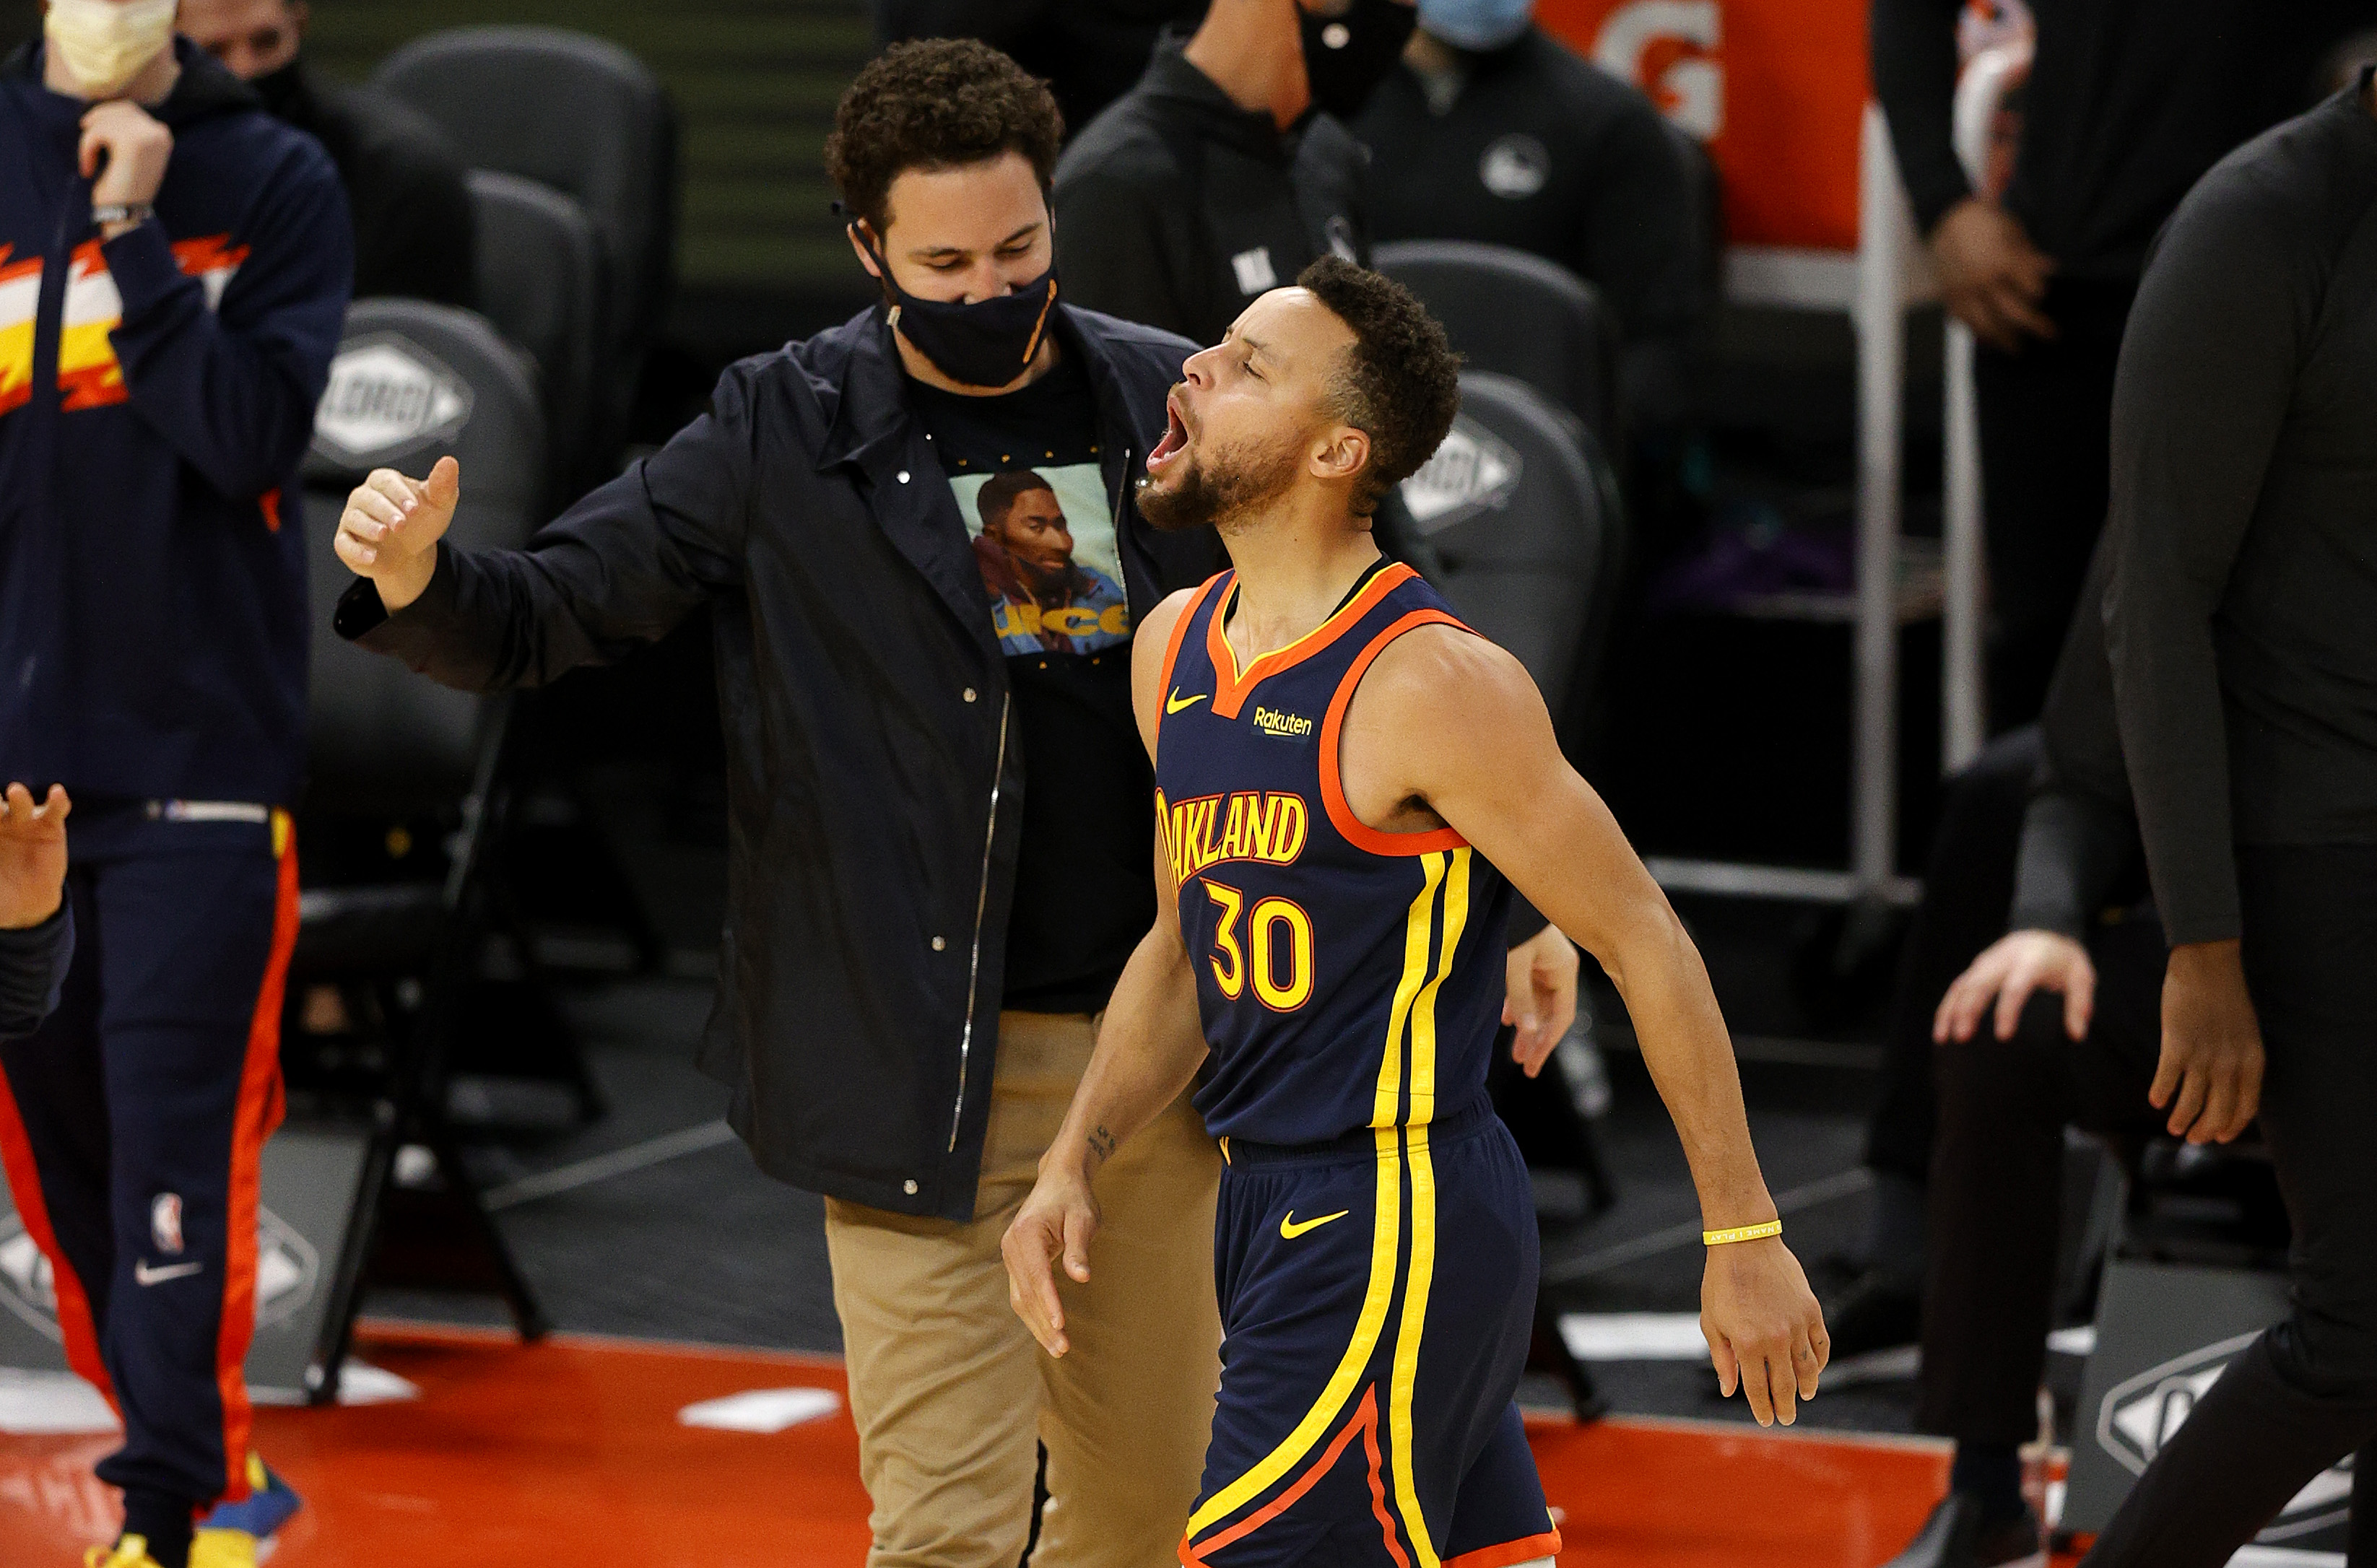 Warriors stars Klay Thompson and Stephen Curry react during a game in January